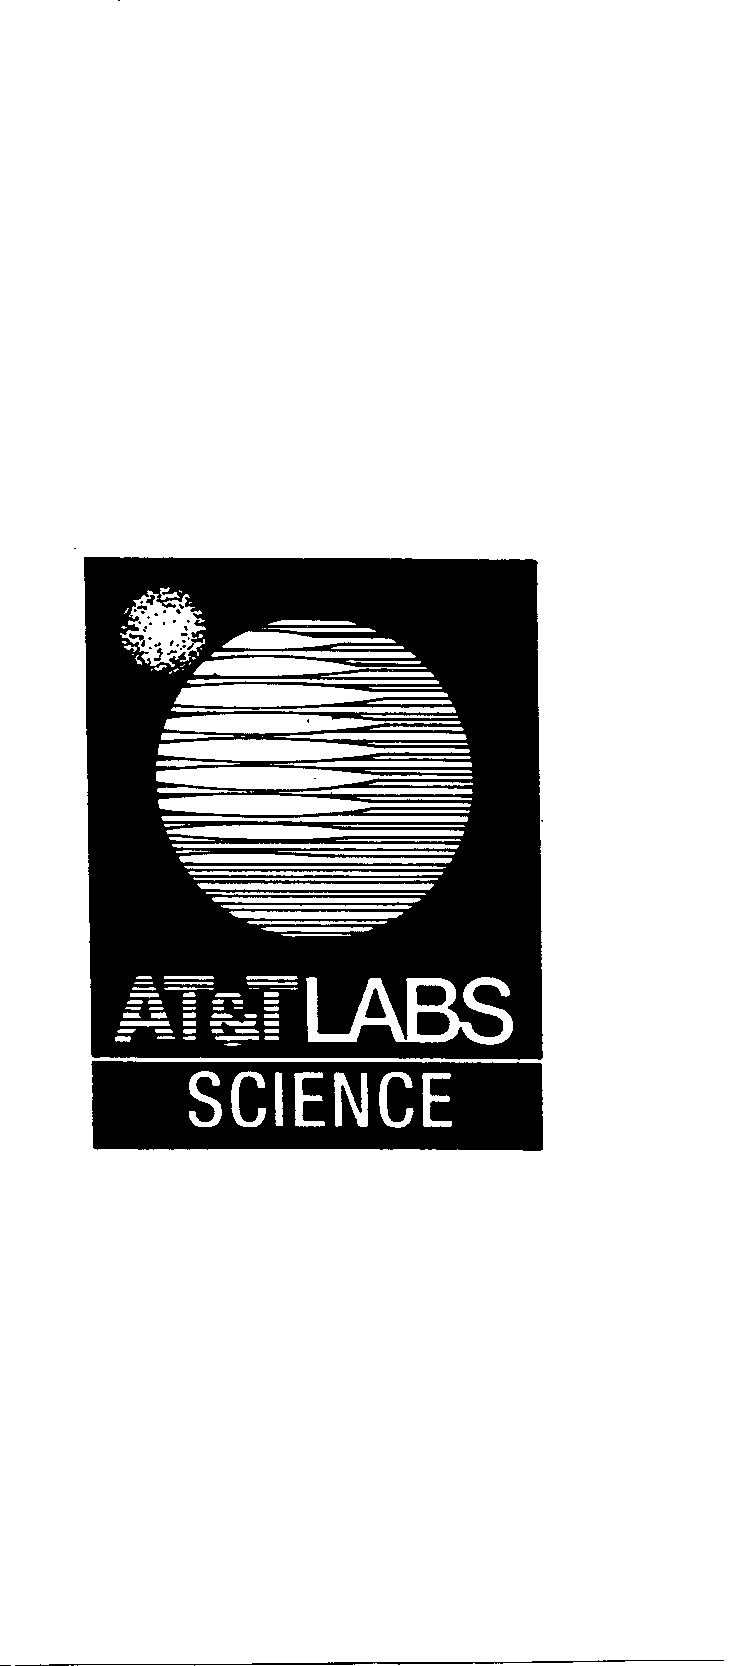  AT&amp;T LABS SCIENCE